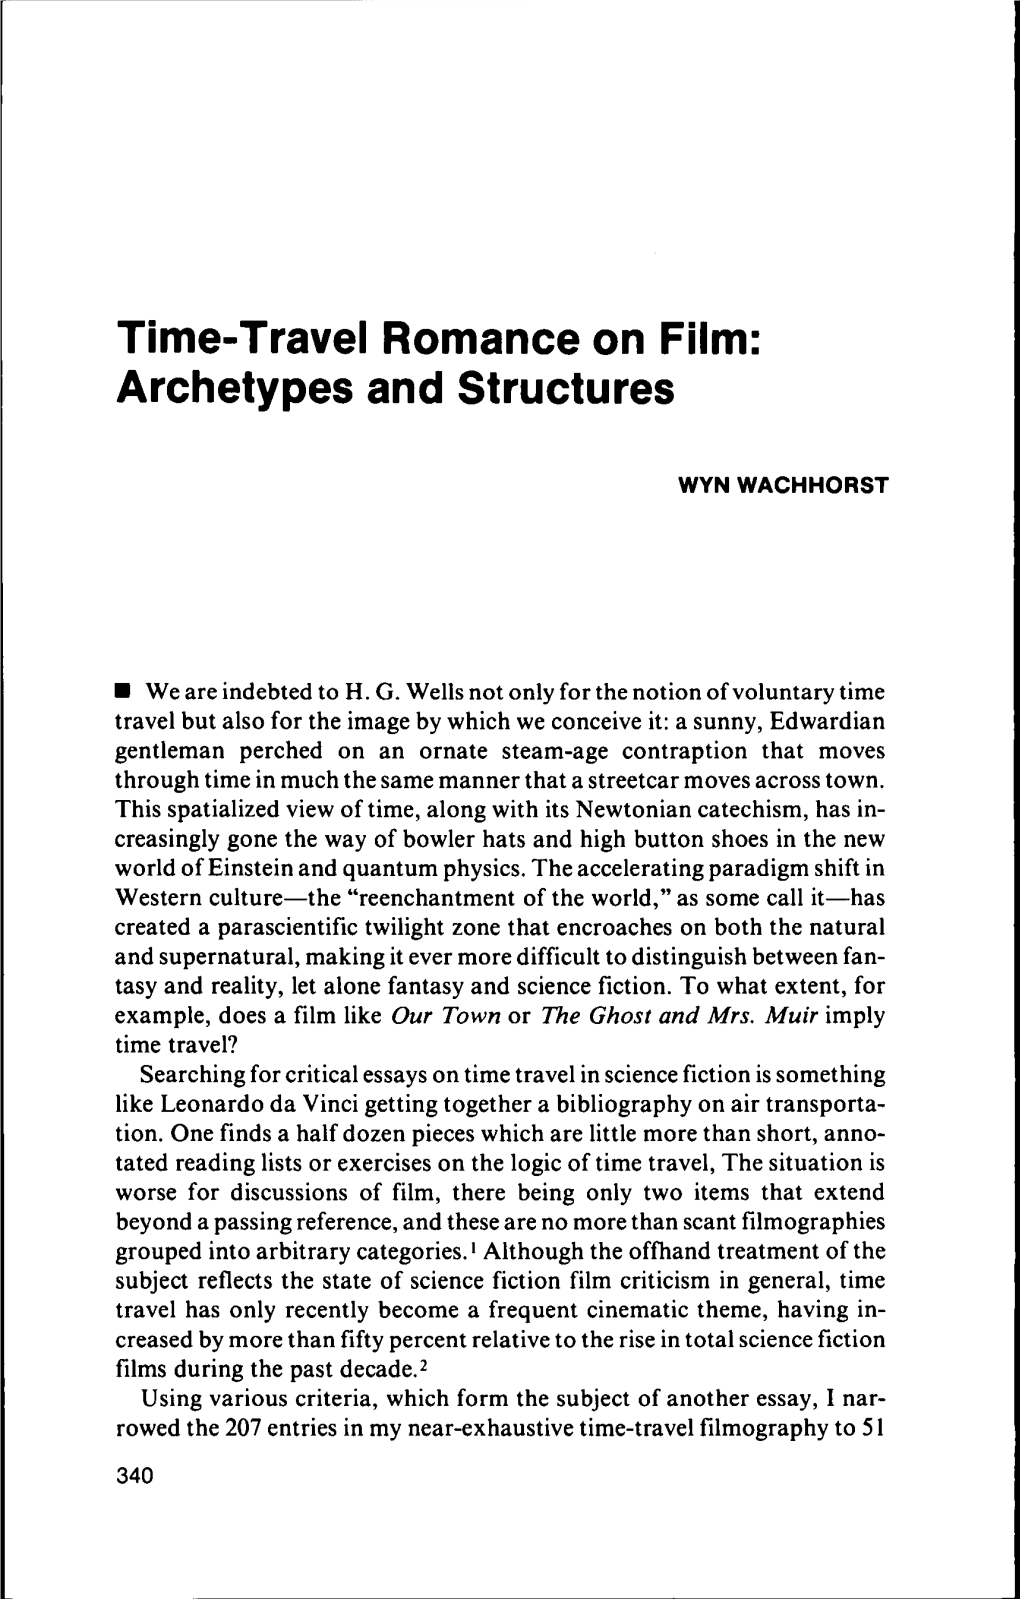 Time-Travel Romance on Film: Archetypes and Structures